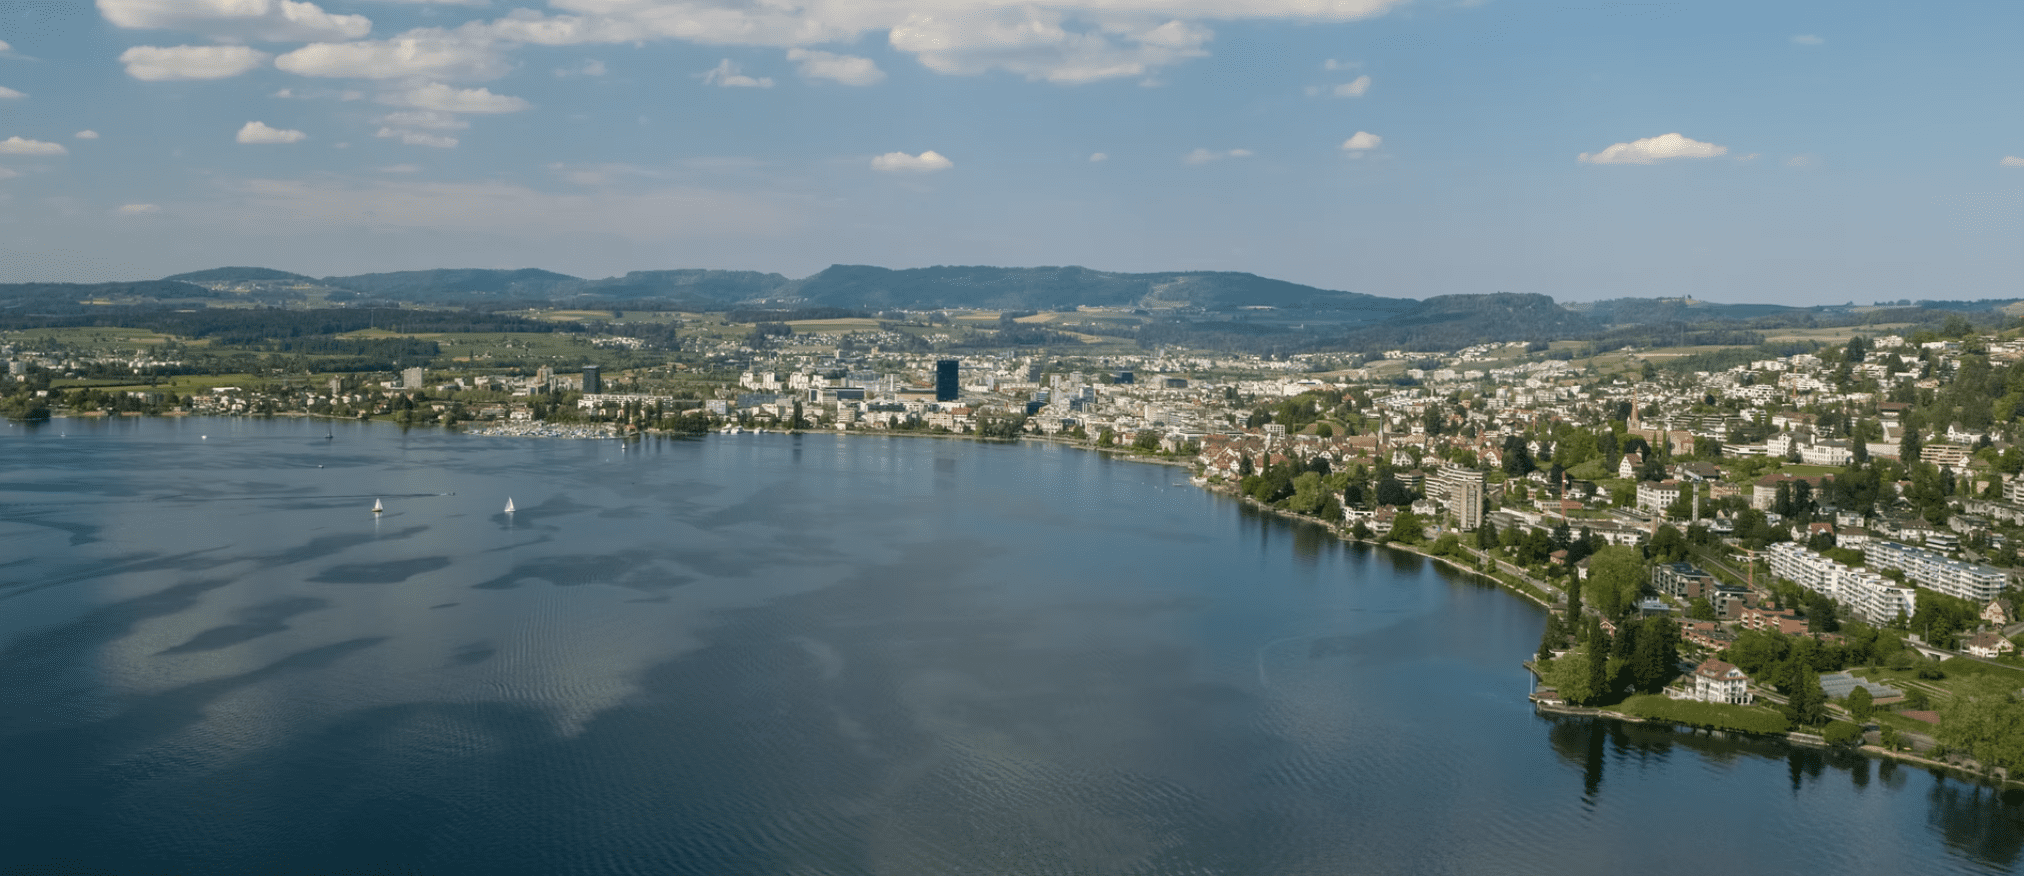 List of 3 real estate investors from Zug